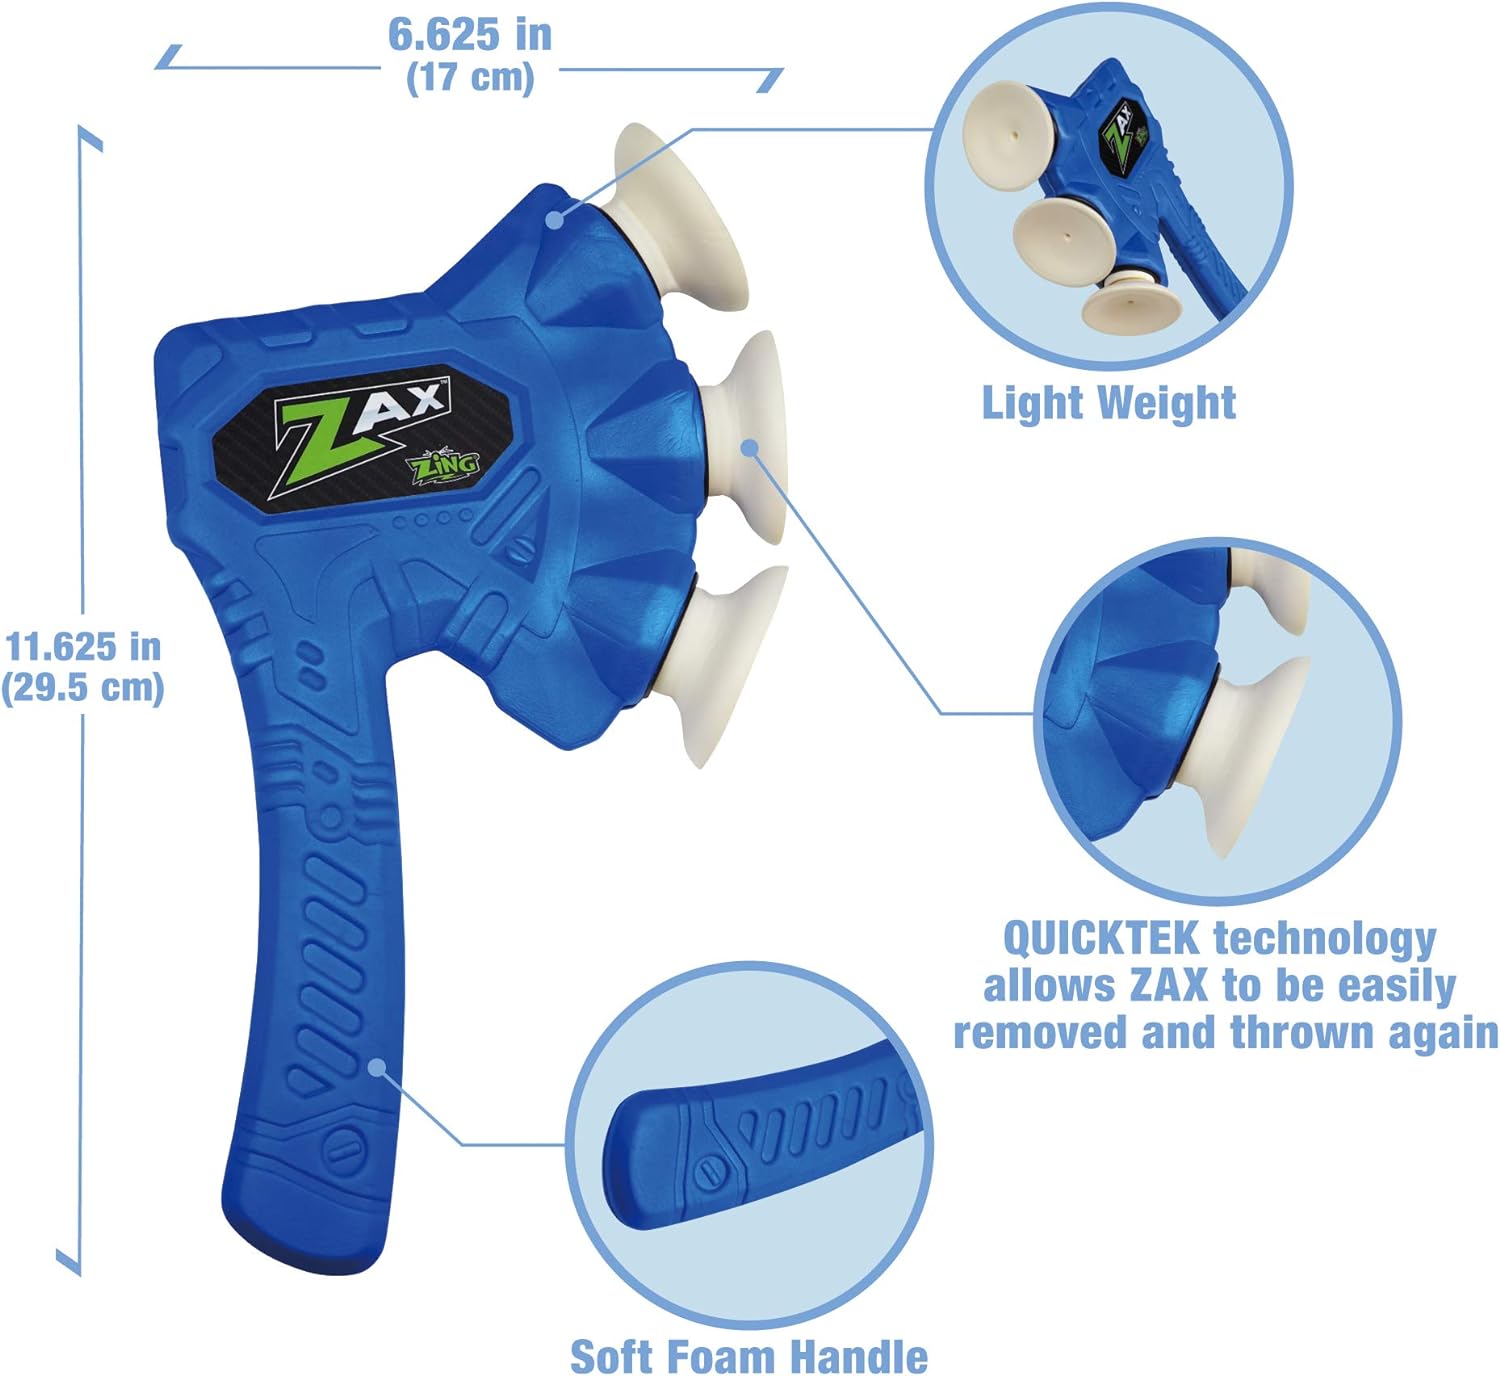 Zing Zax Foam Throwing Axe Game - Built For Perfect Spin